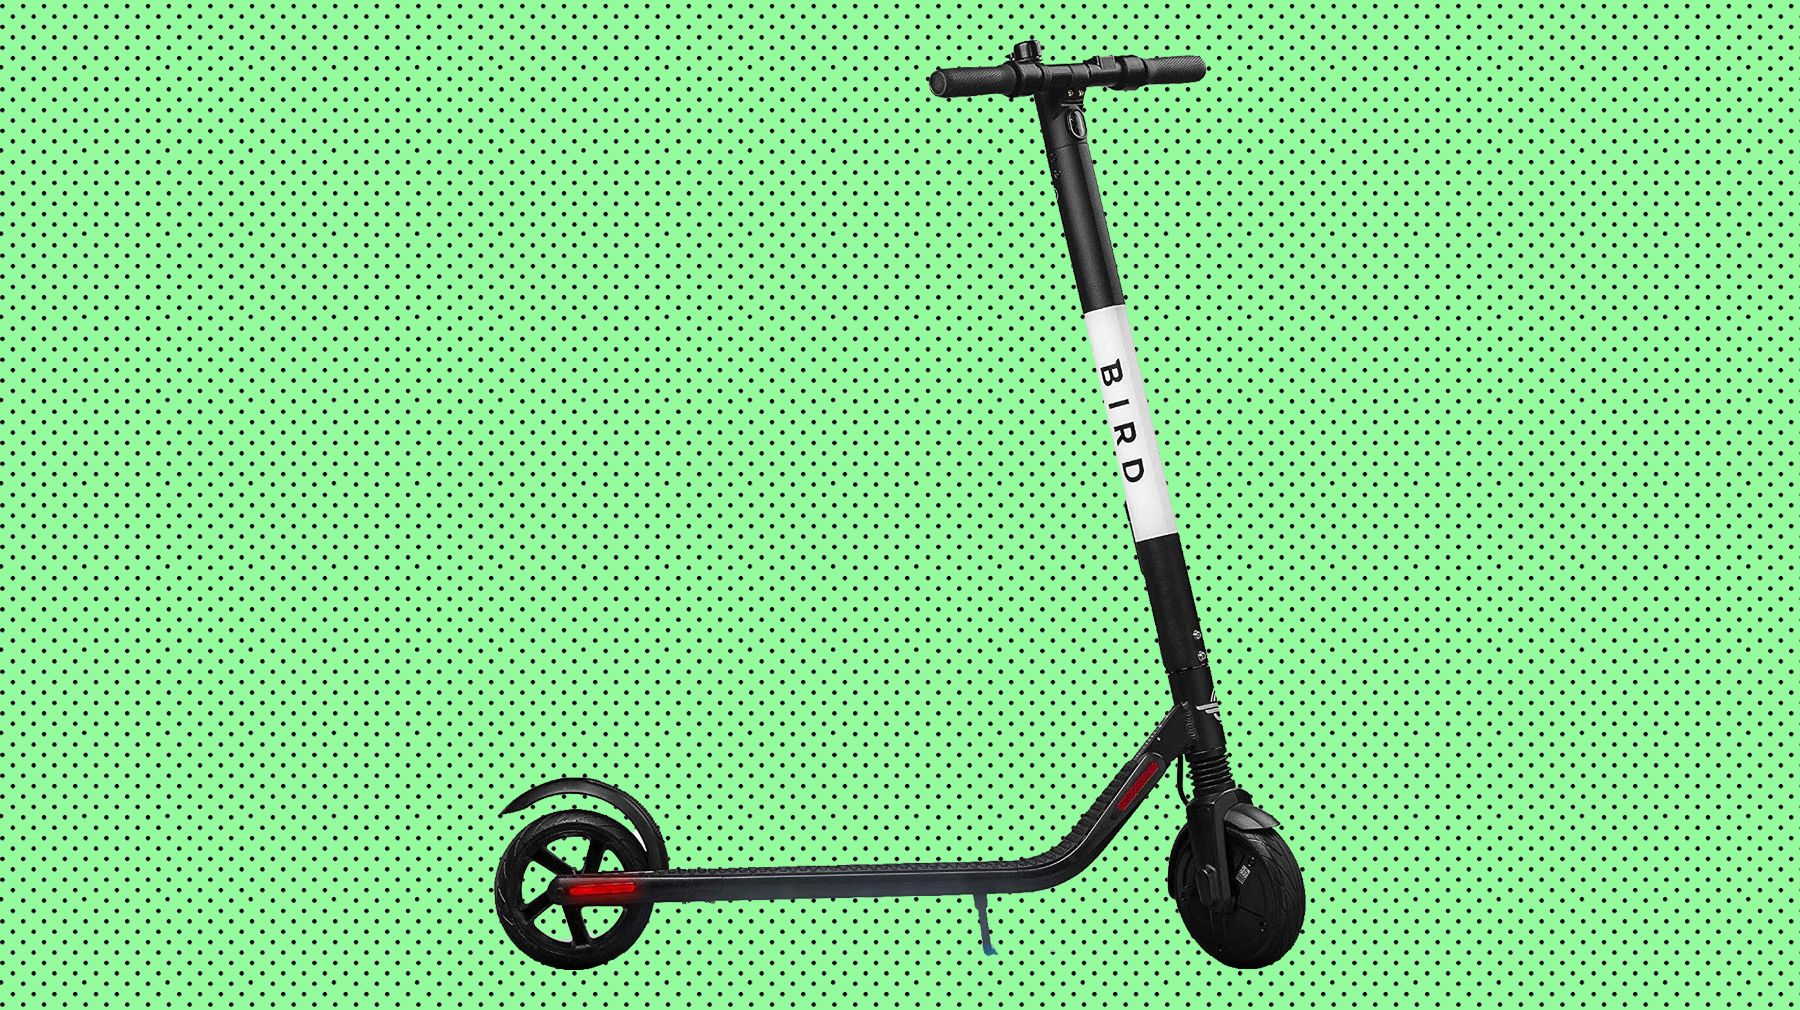 Buy Your Own Refurb Bird Electric Scooter Now On Sale At Amazon Cnn Underscored